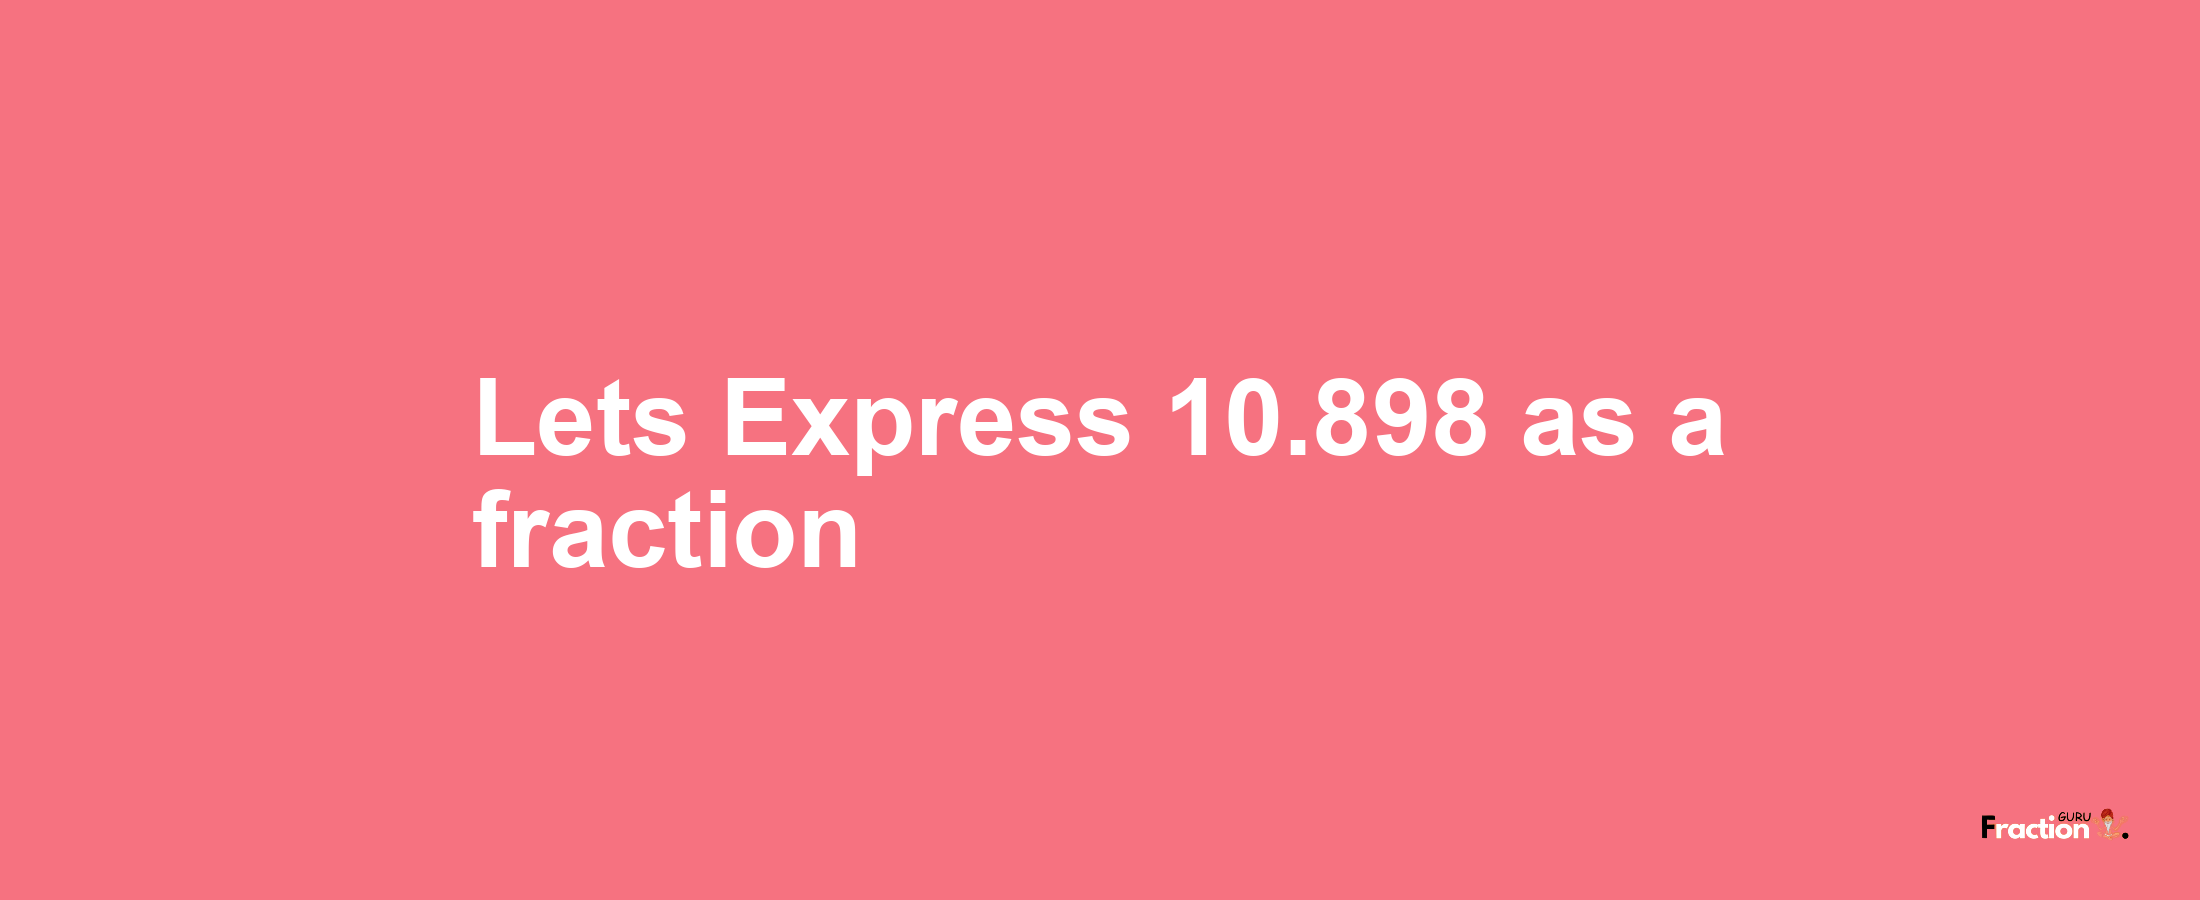 Lets Express 10.898 as afraction